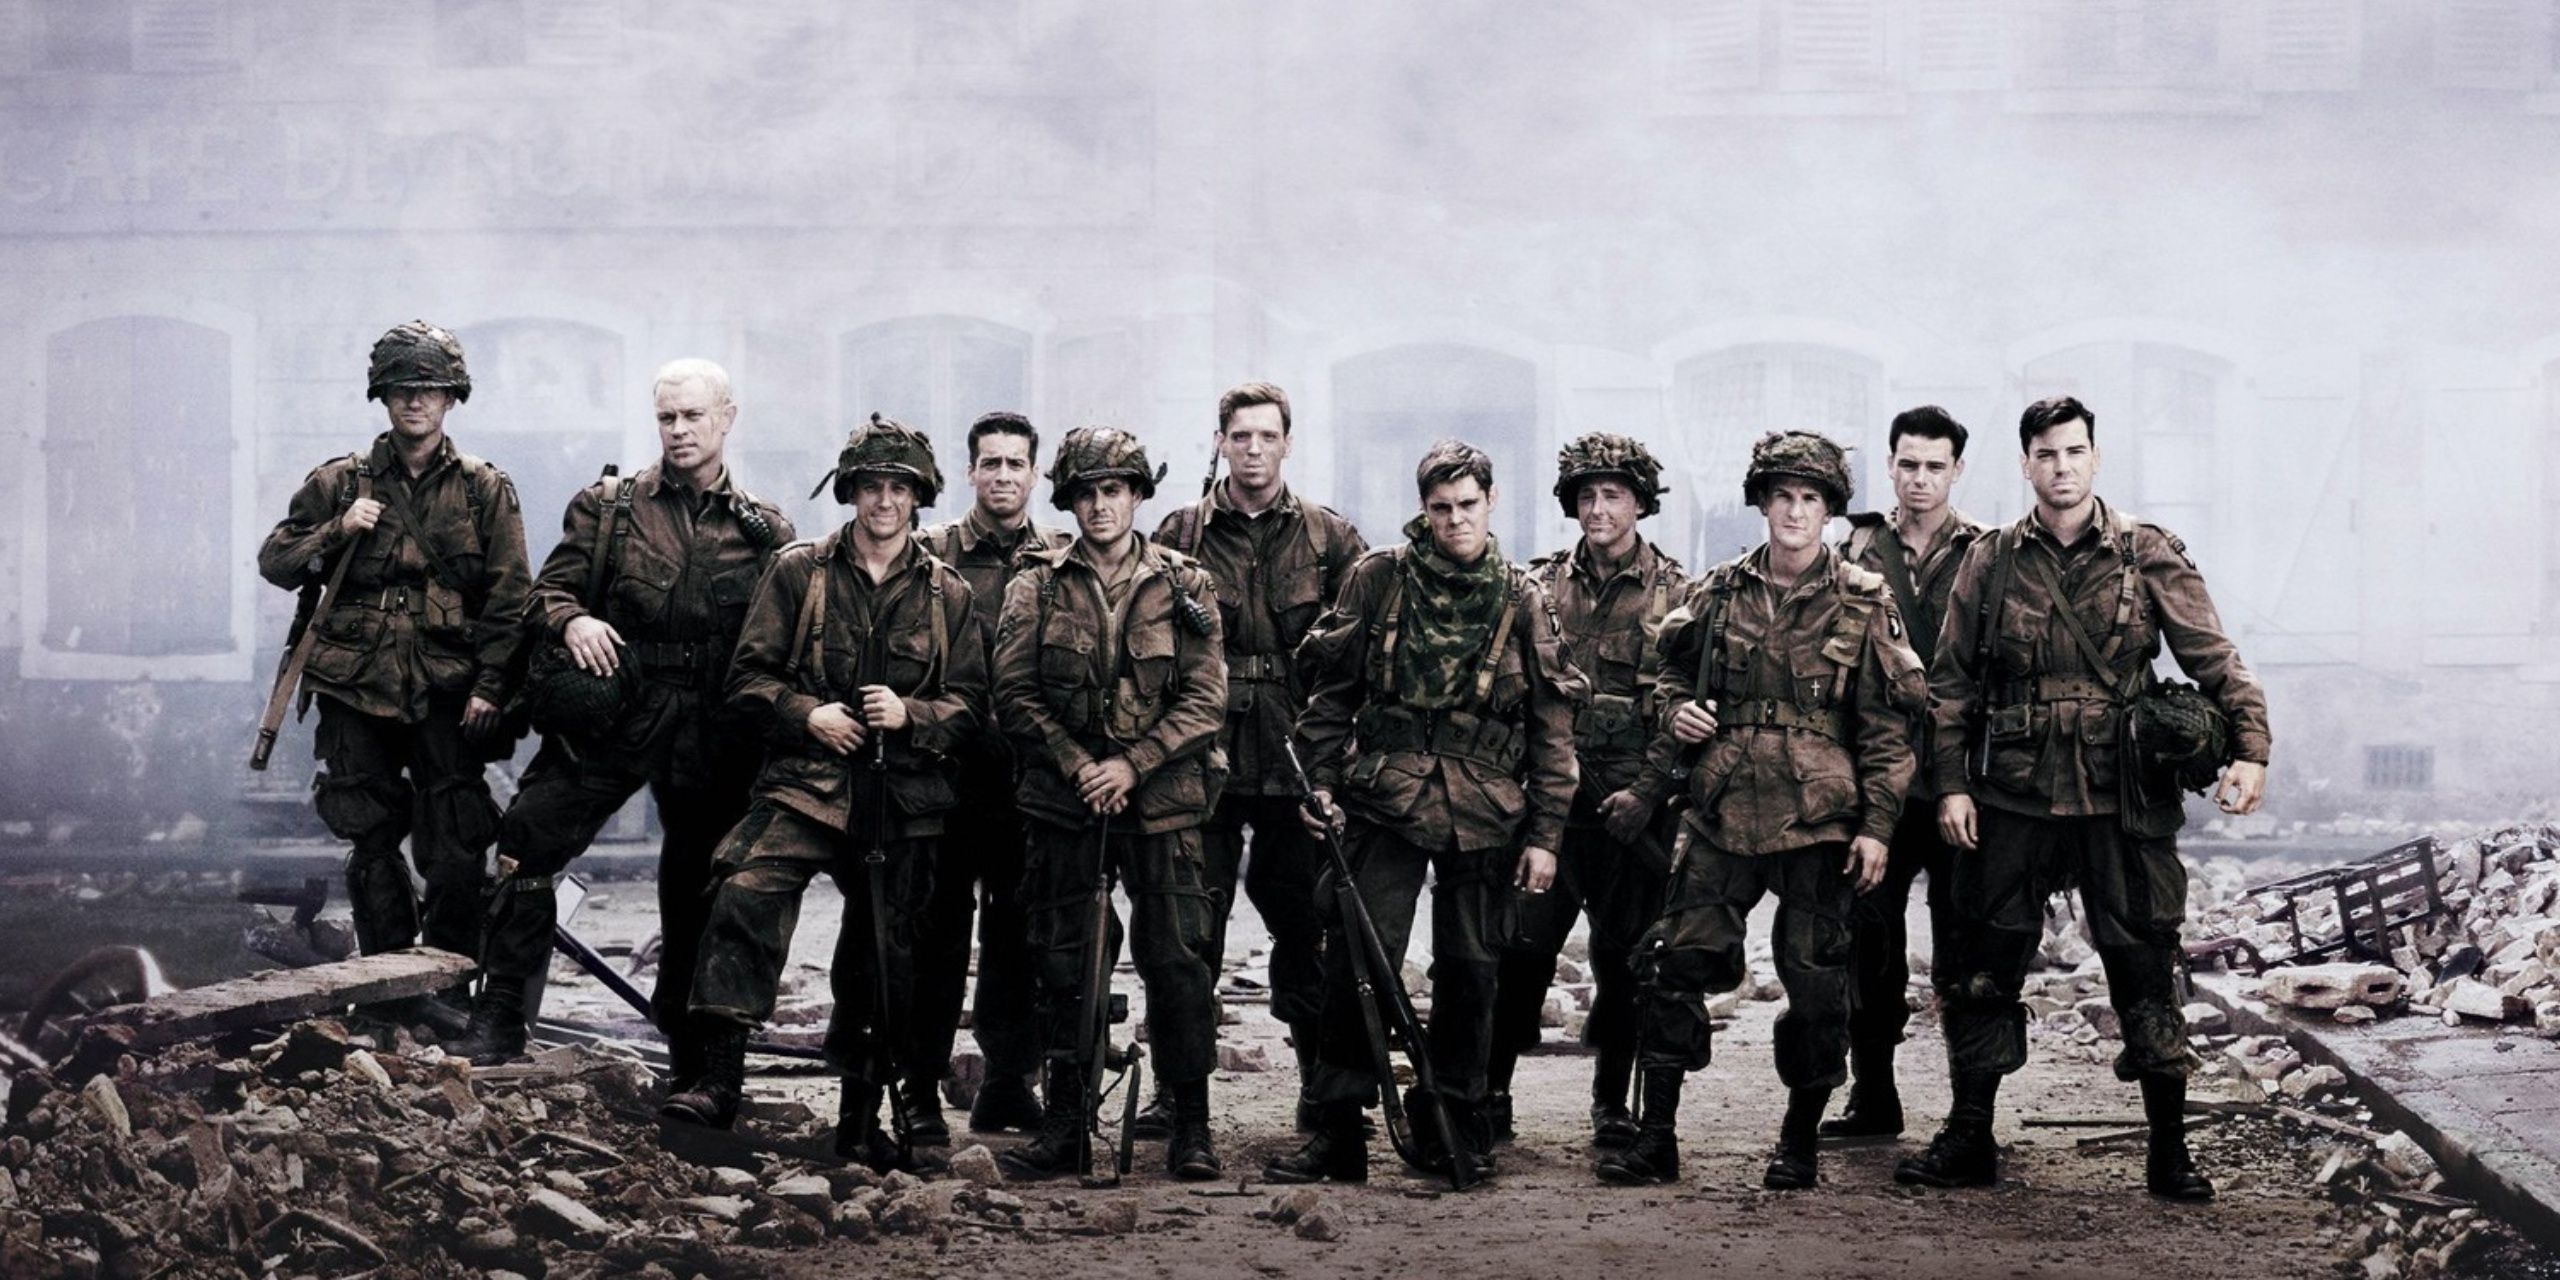 A group of soldiers standing in a misty background in Band of Brothers